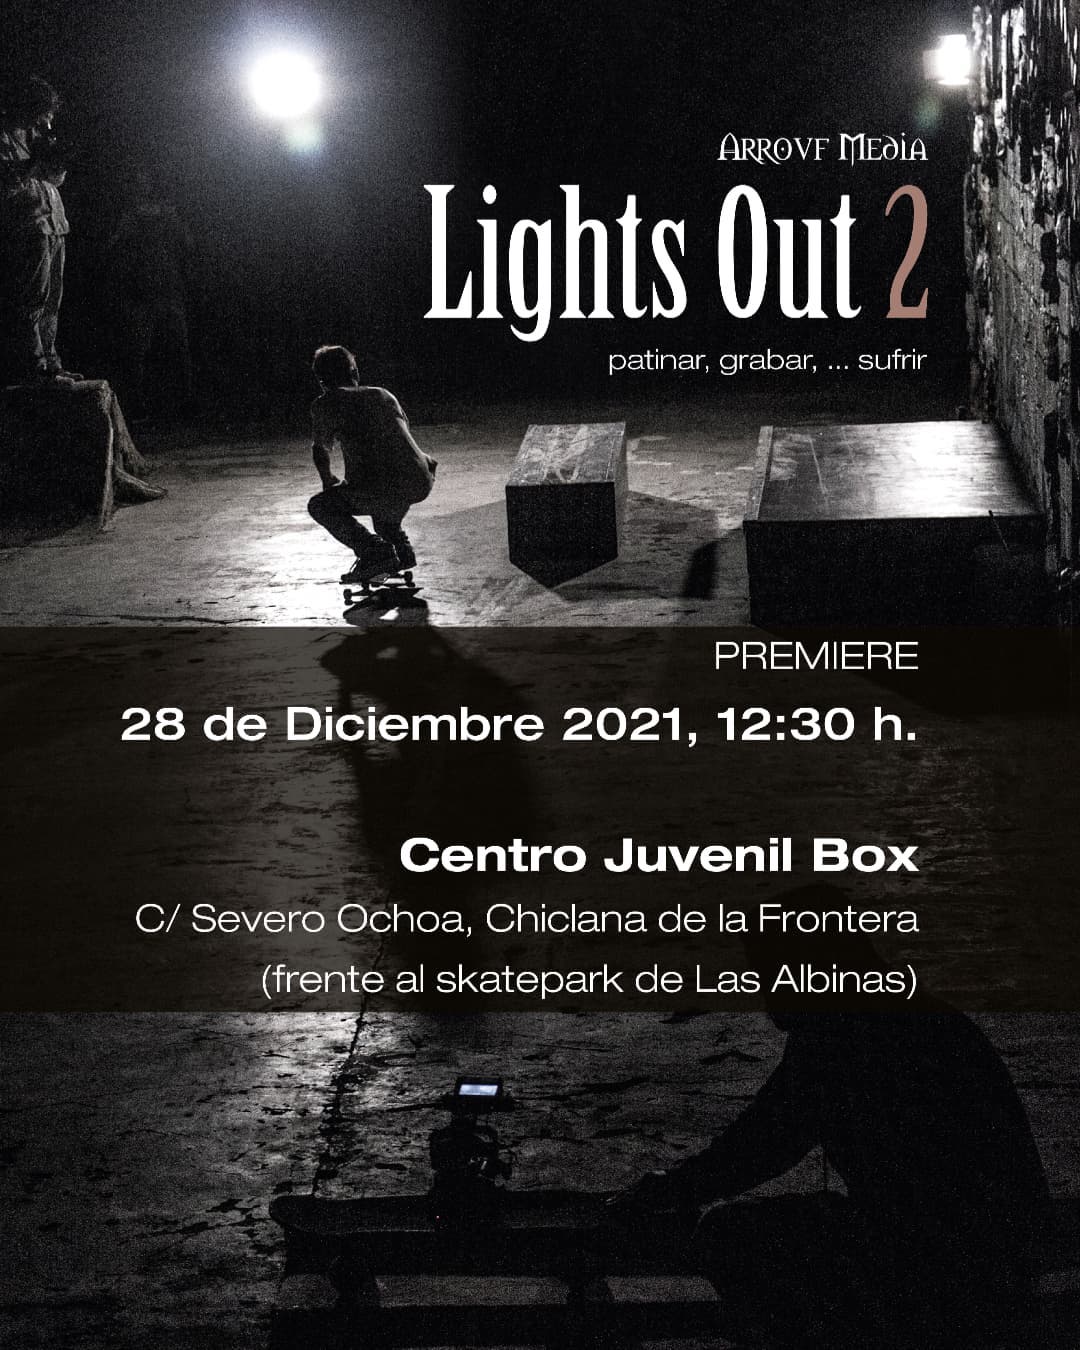 premiere lights out 2 chiclana